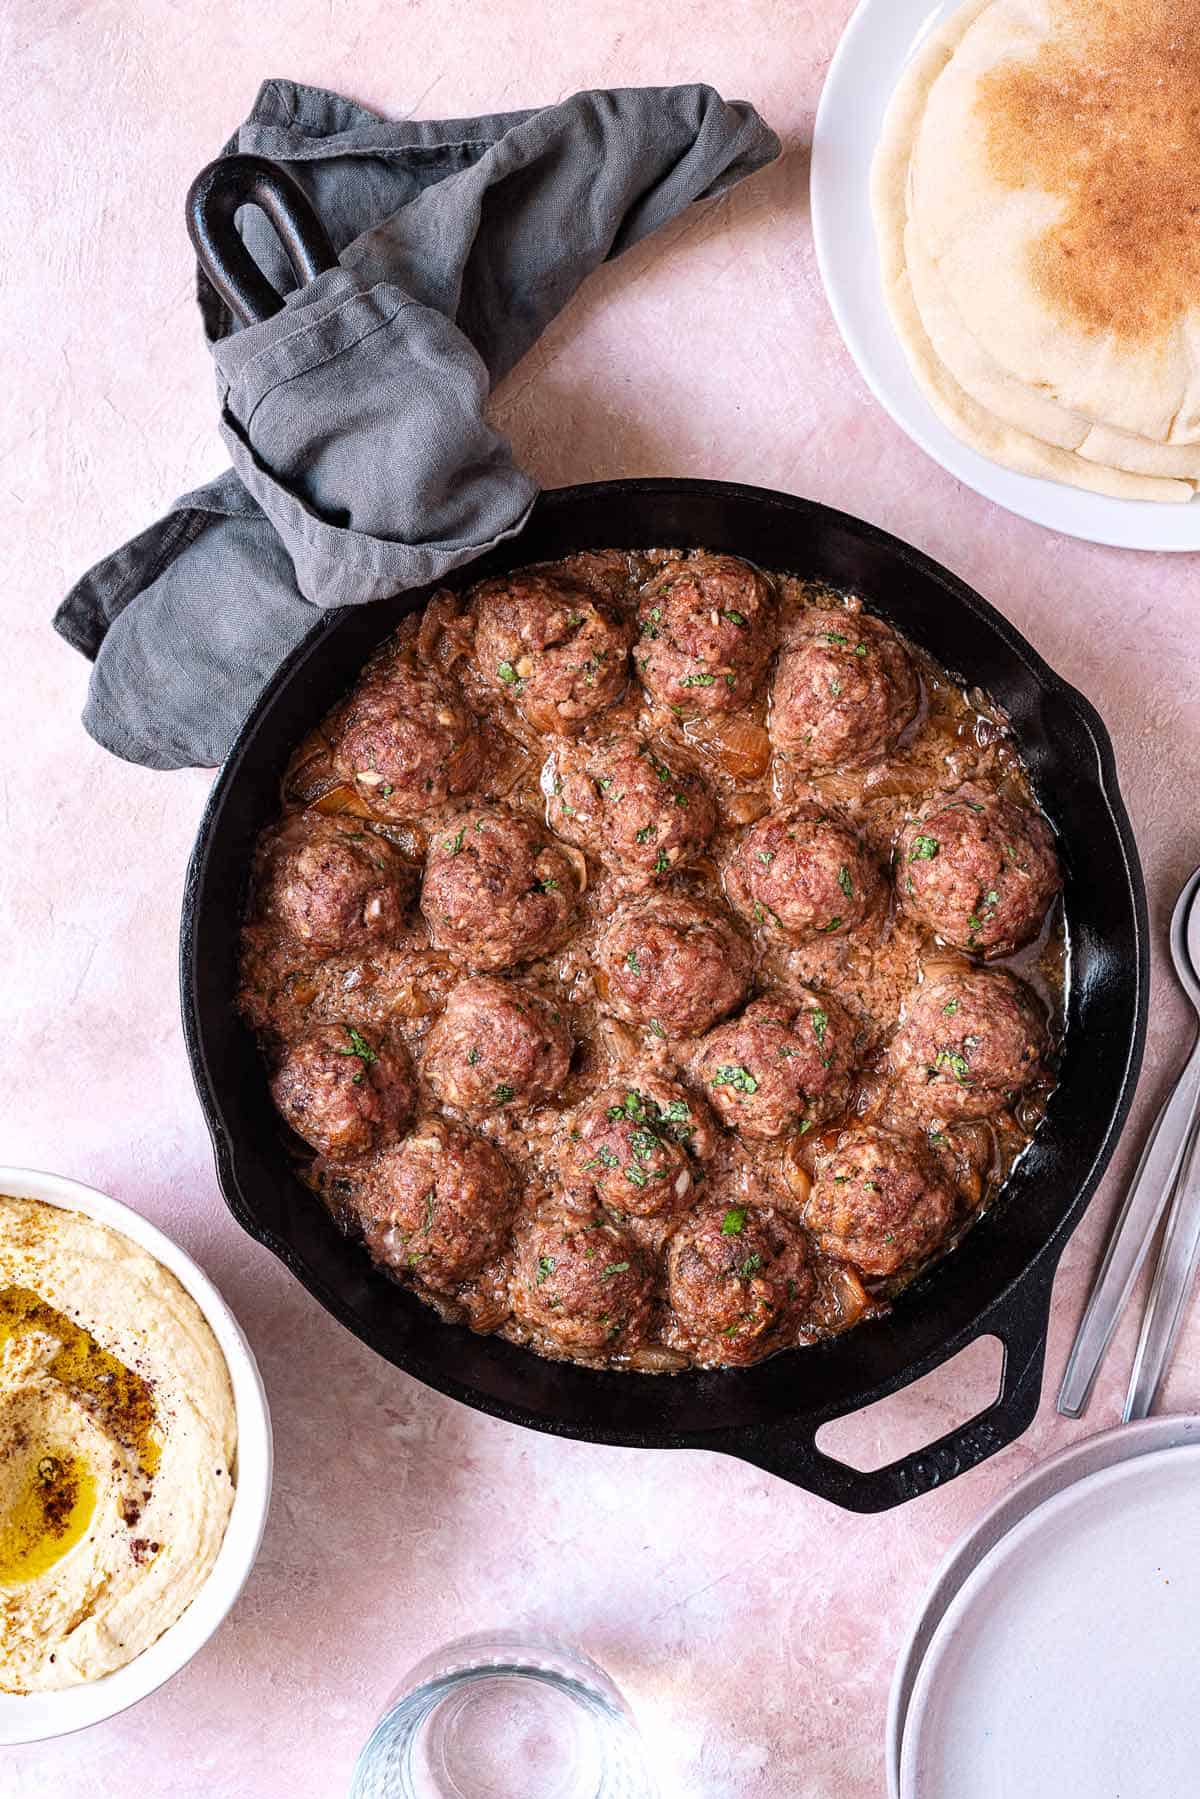 lamb meatballs in a cast iron skillet next to a side of hummus and pita bread.